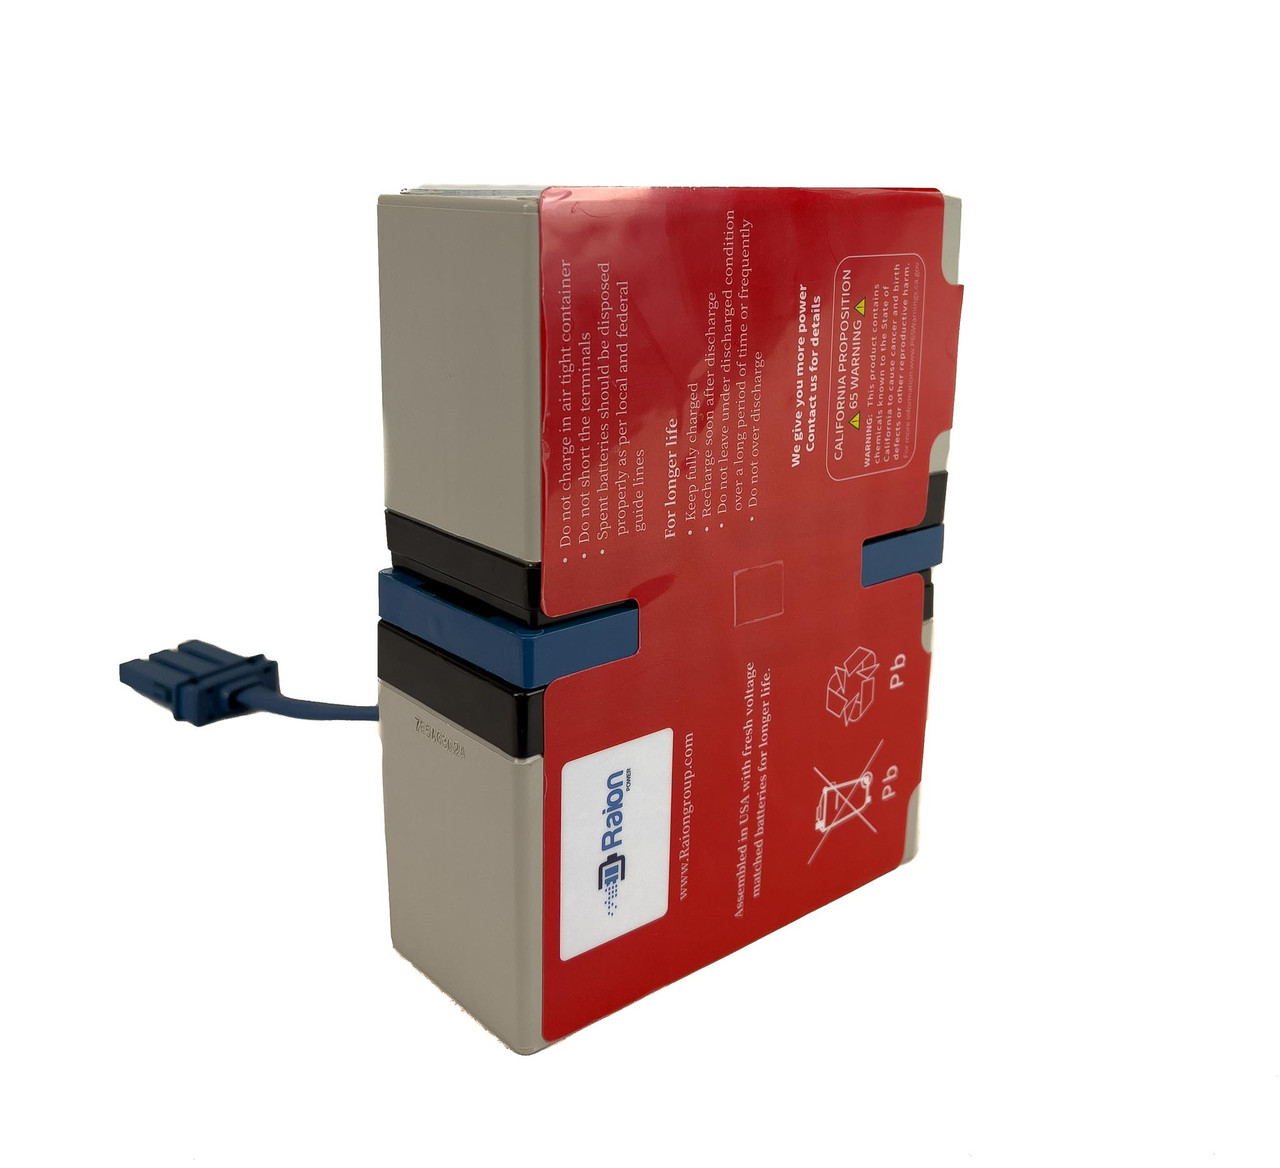 Raion Power RG-RBC32 Replacement High Rate Battery Cartridge for APC Back-UPS RS 1200VA BR1200